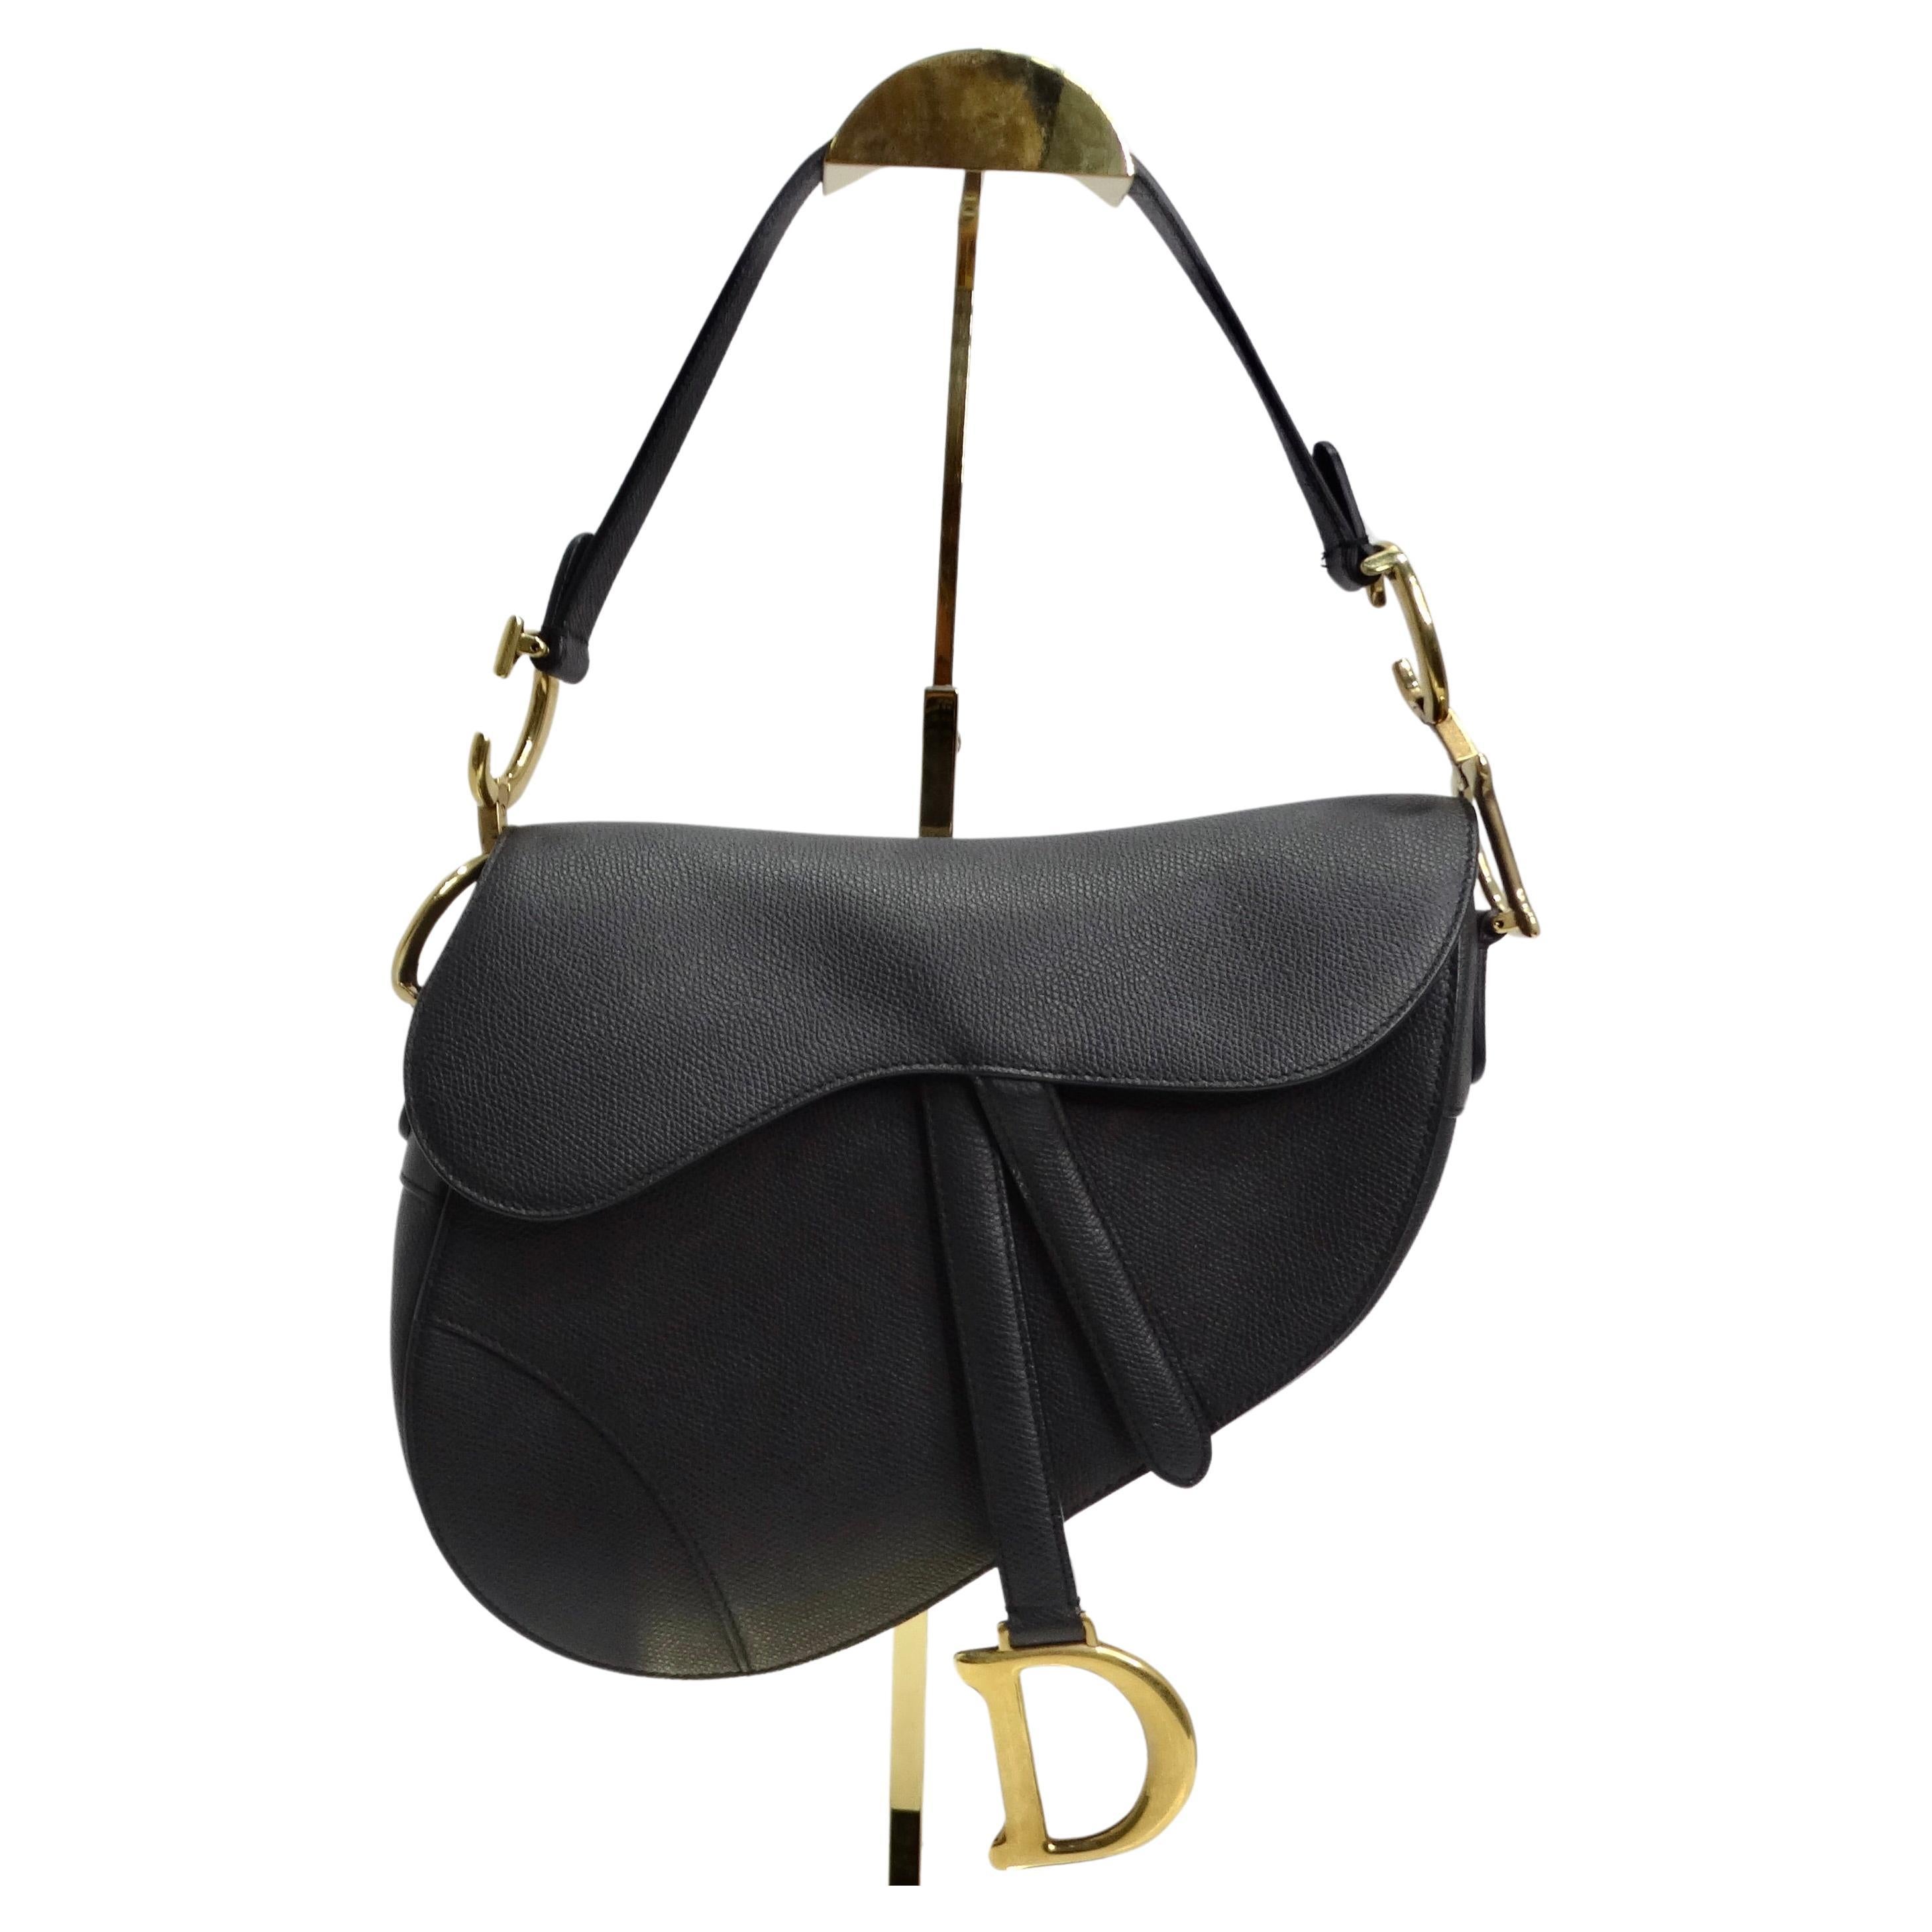 How can I tell if a Dior Saddle bag is real?